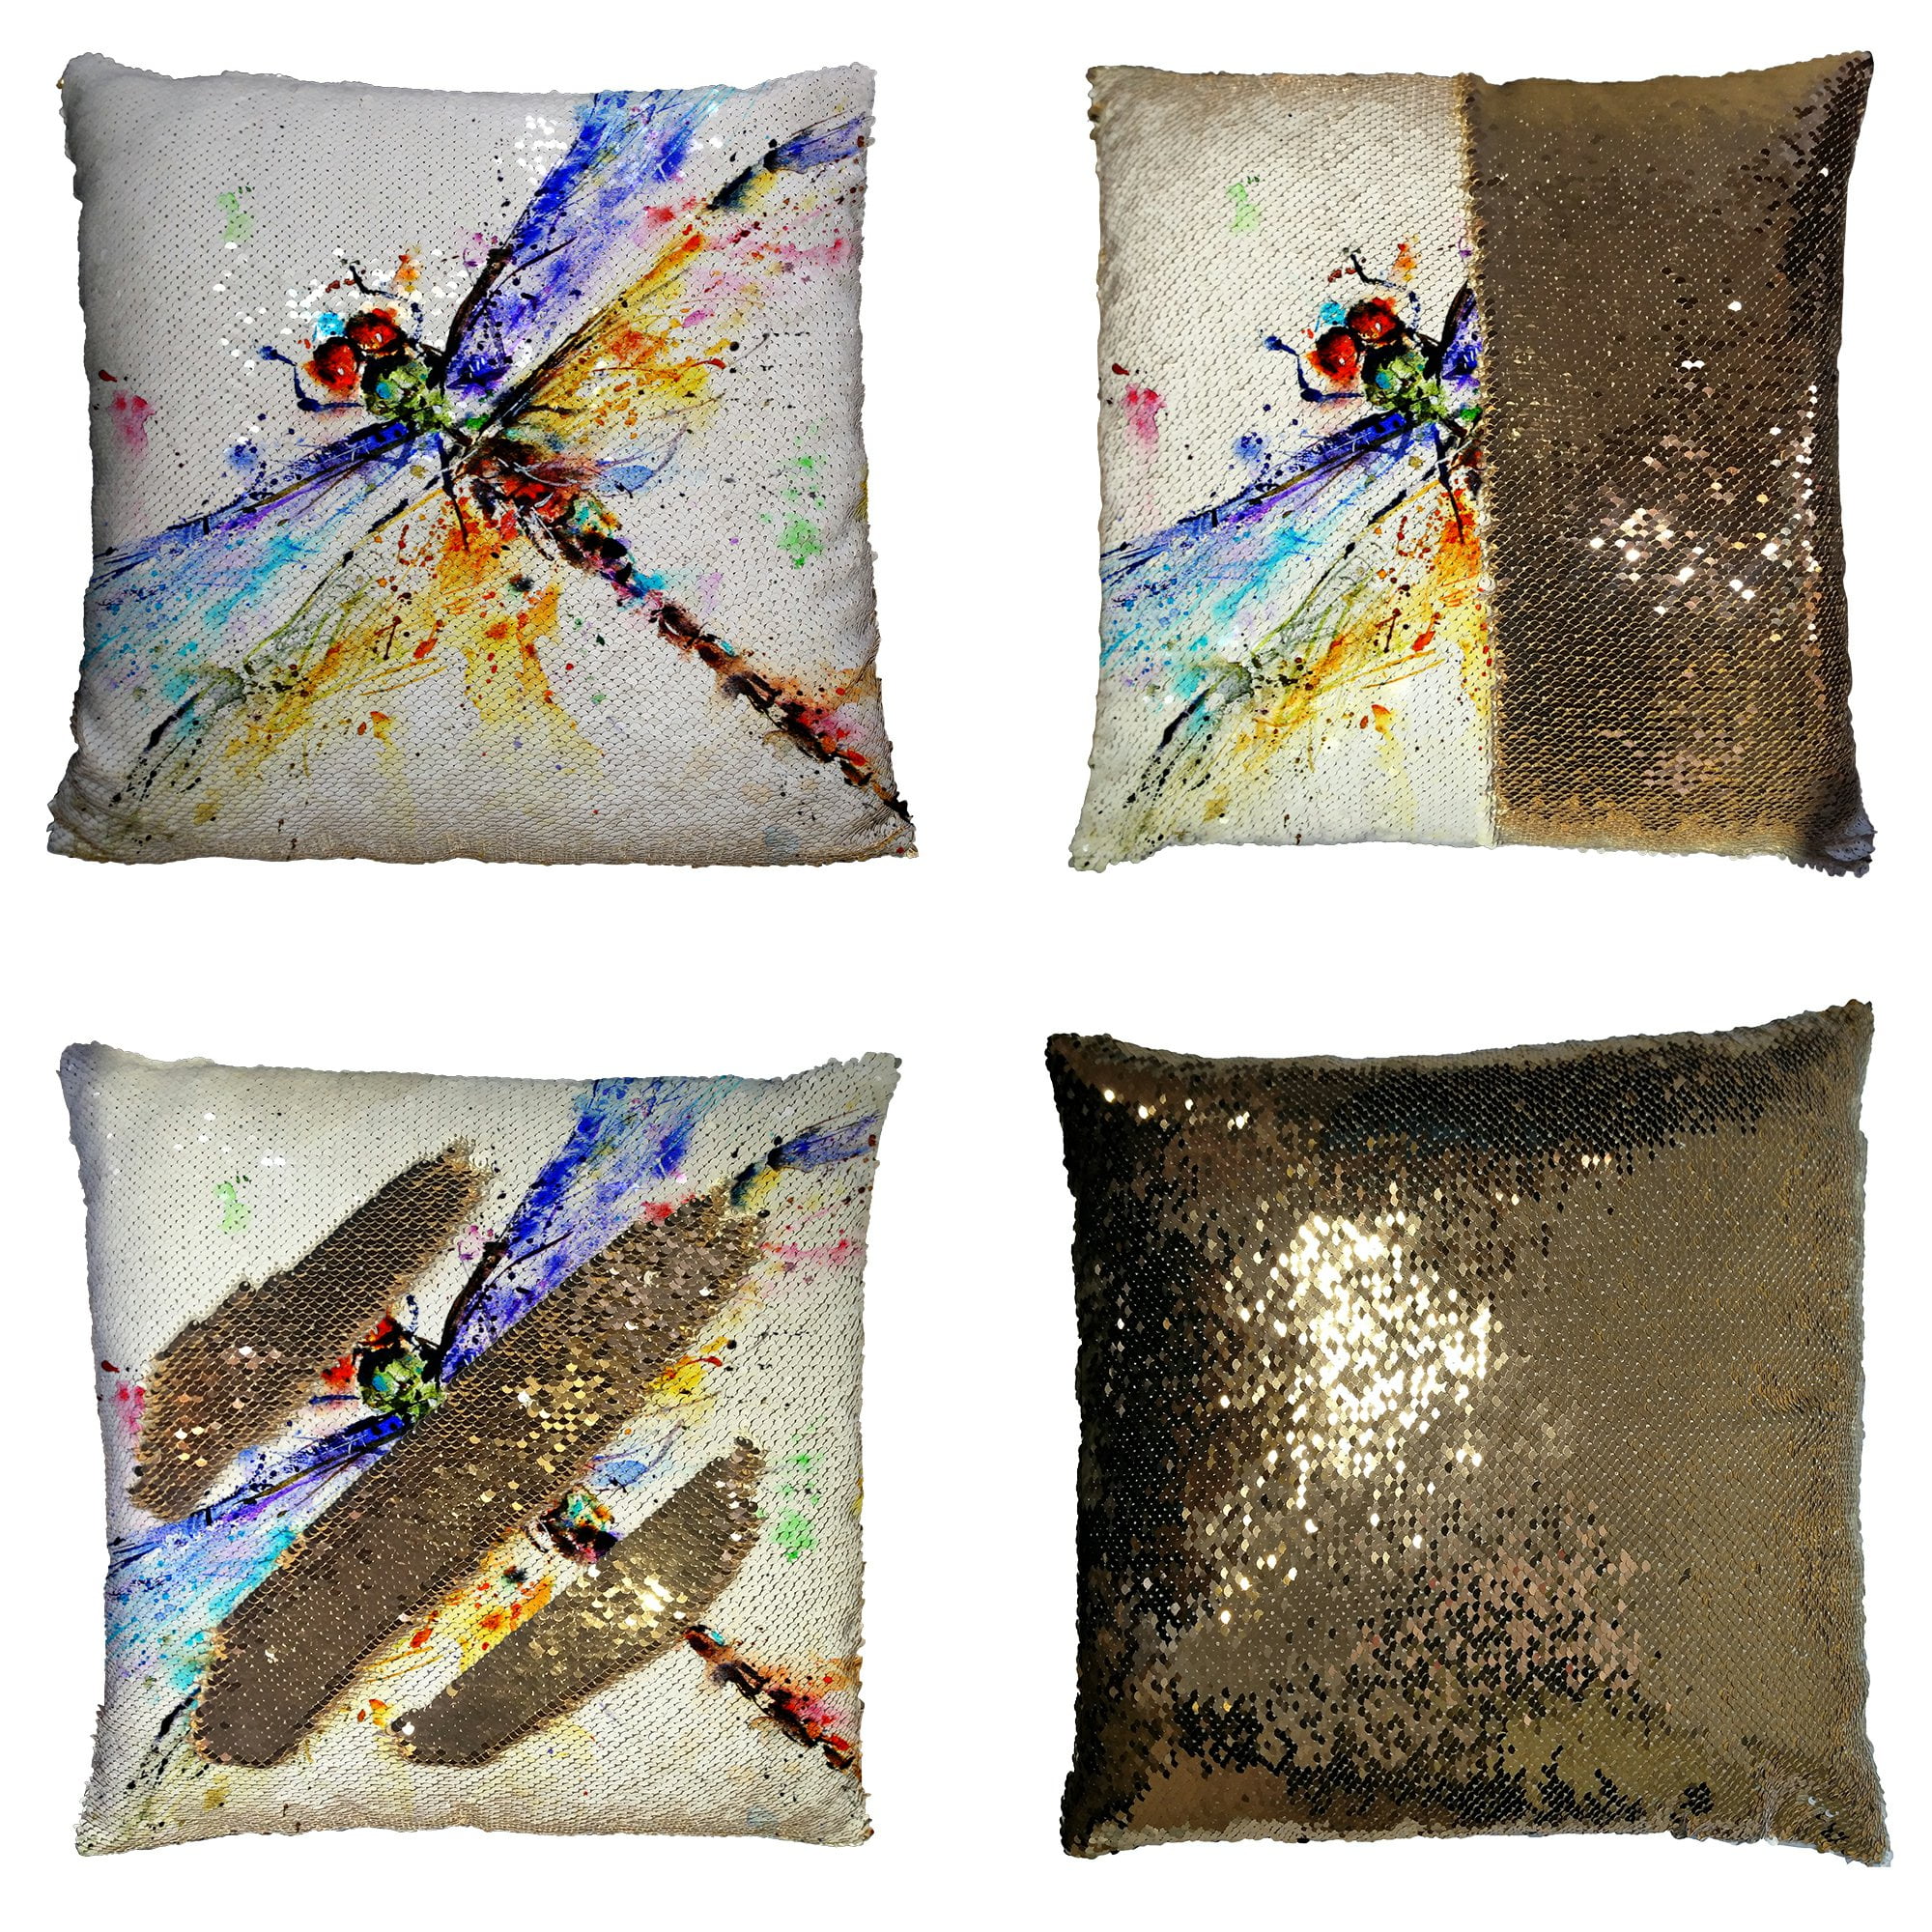 Dragonfly Life Cycle Grey Cushion Covers Pillow Cases Home Decor or Inner